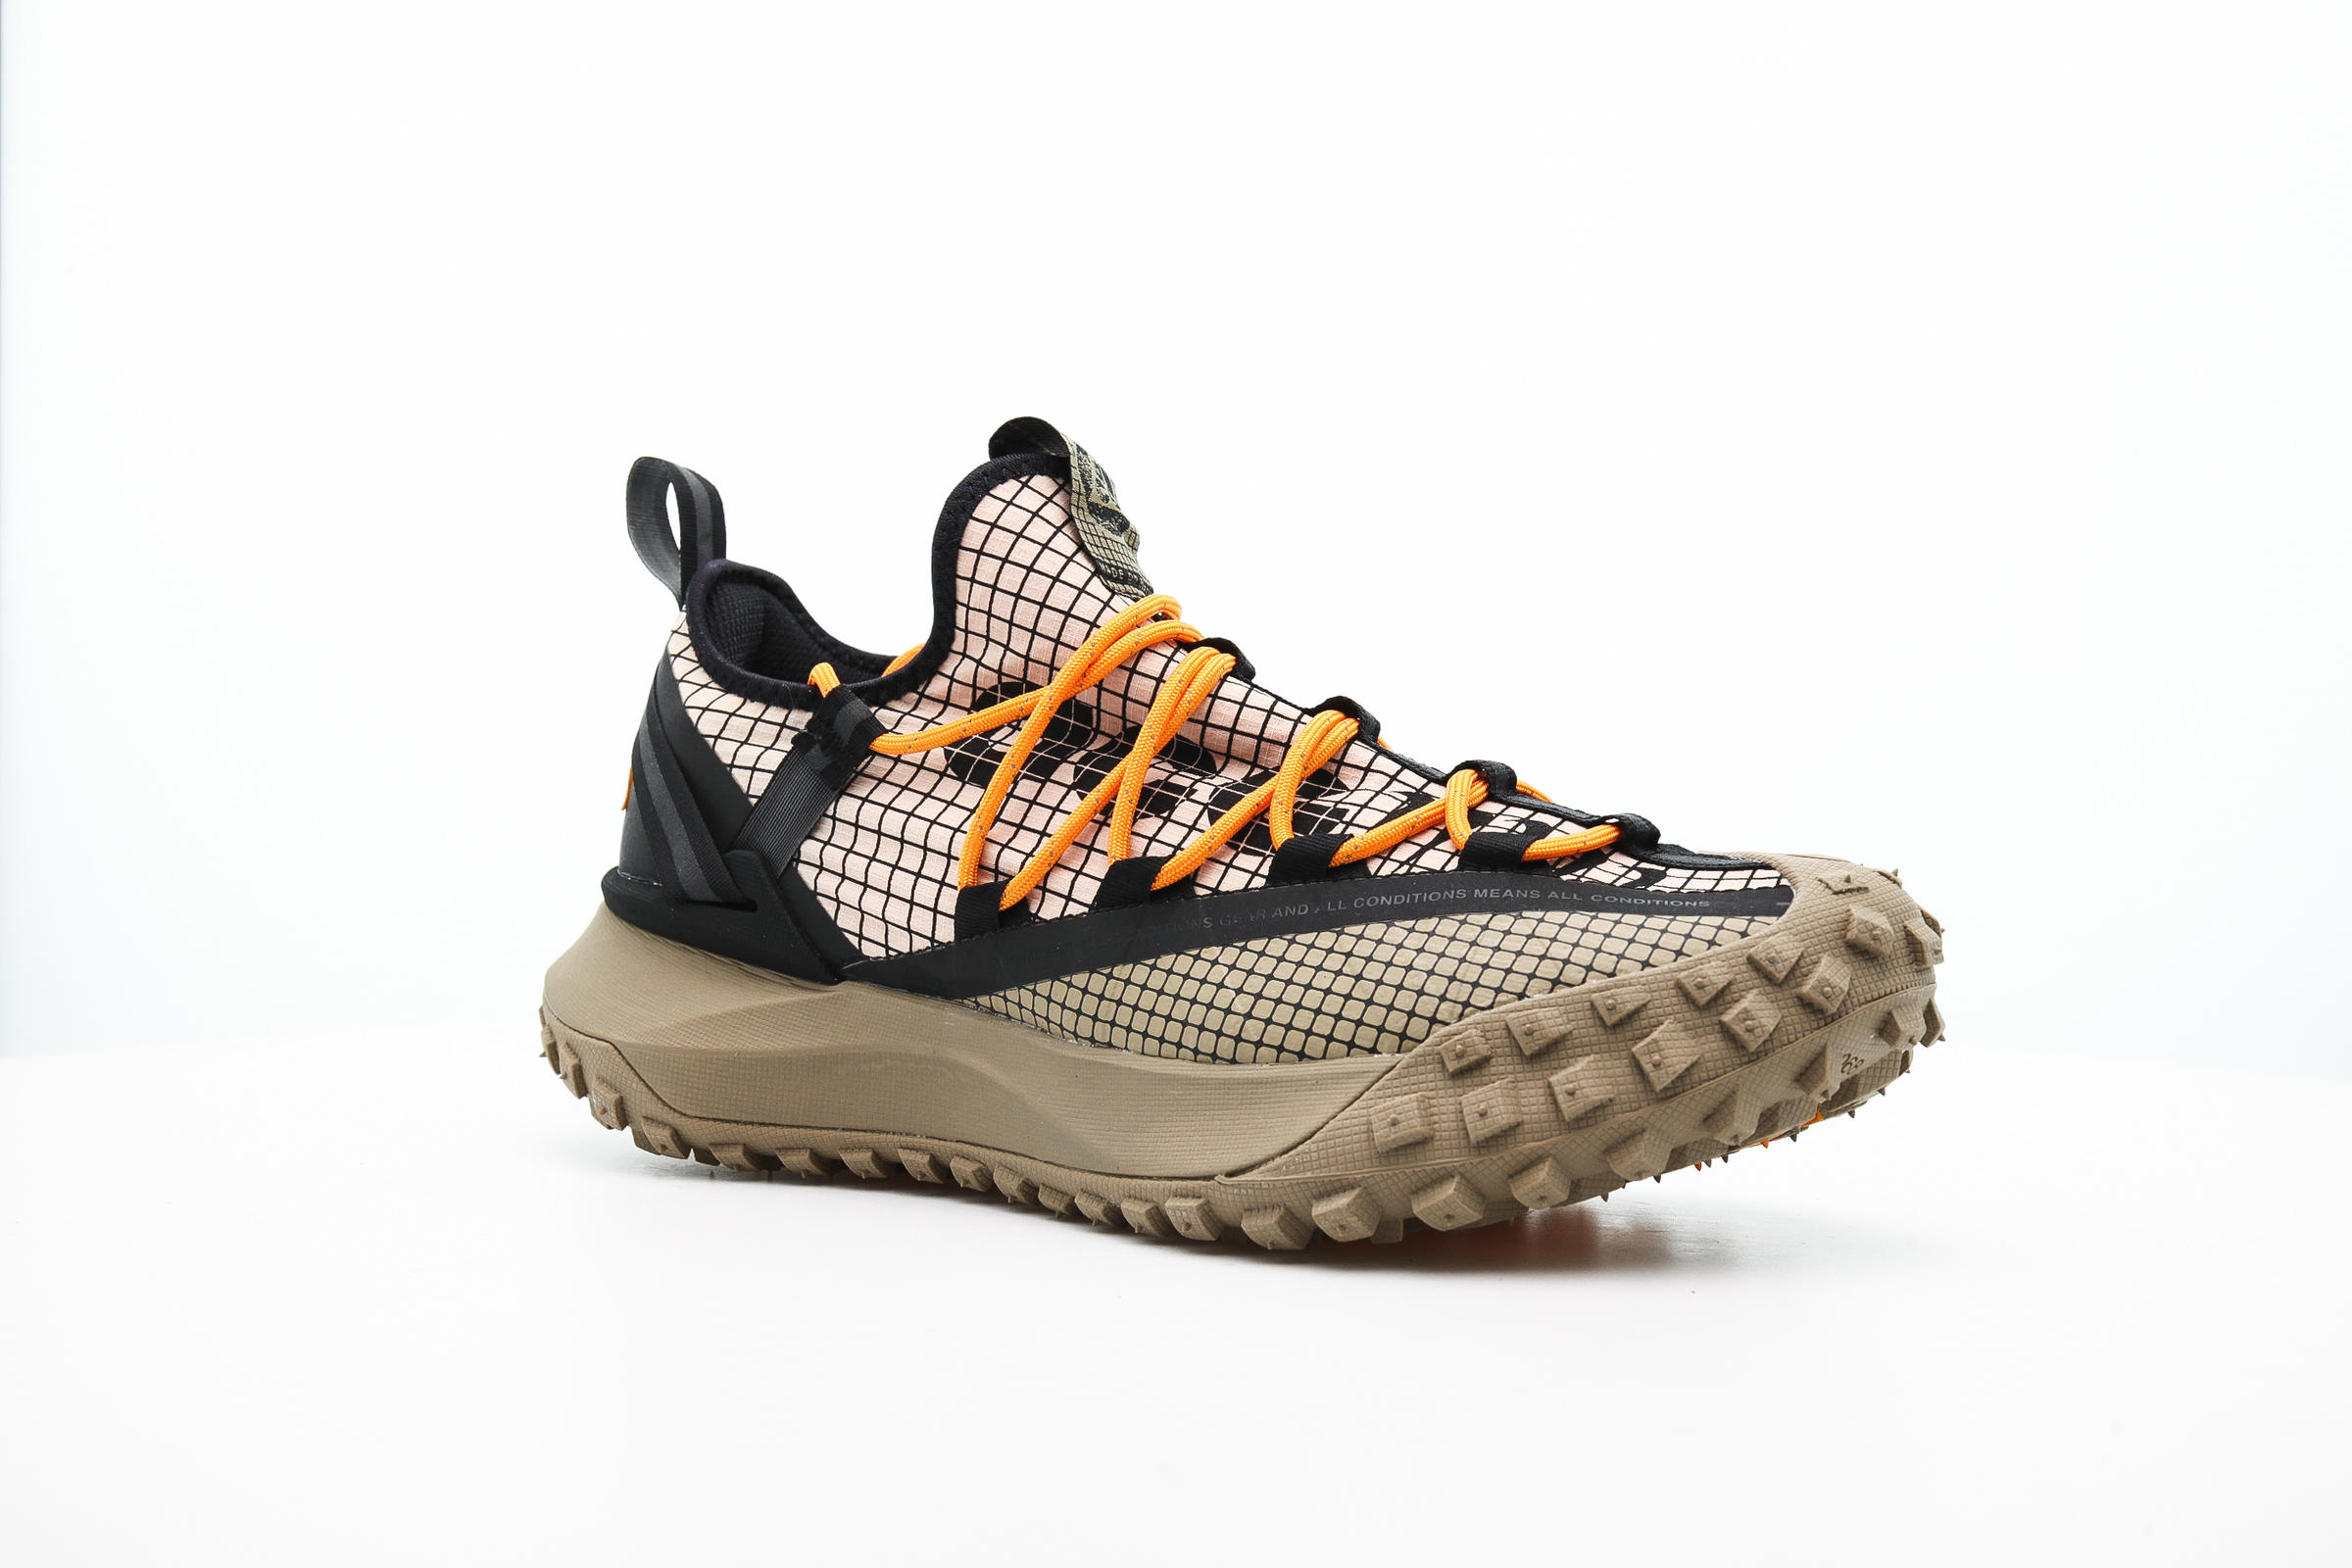 Nike ACG MOUNTAIN FLY LOW "FOSSIL STONE"